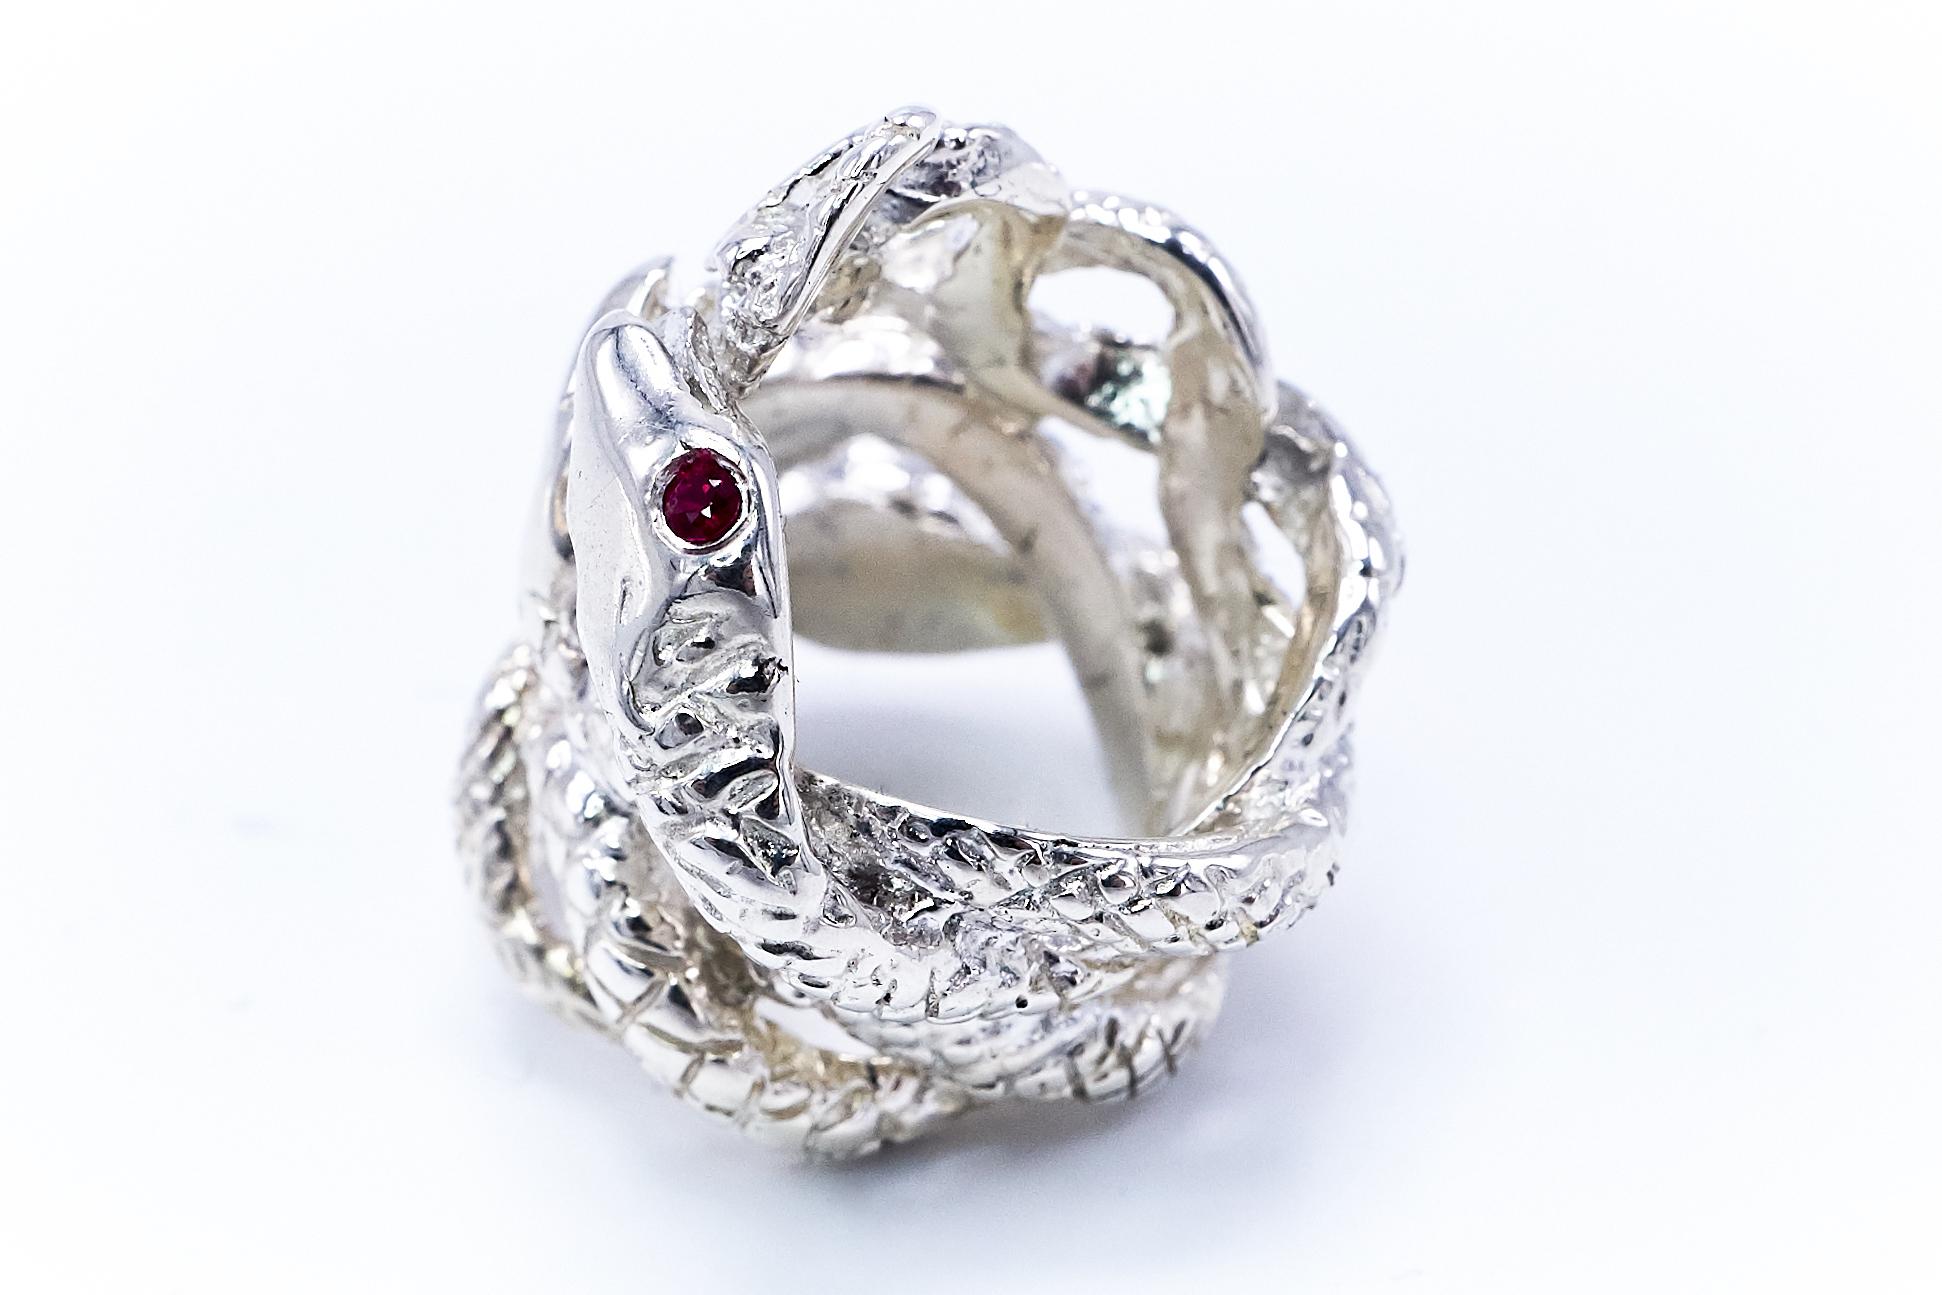 Contemporary Ruby Snake Ring Silver Statement Cocktail Ring Adjustable Onesie J Dauphin For Sale